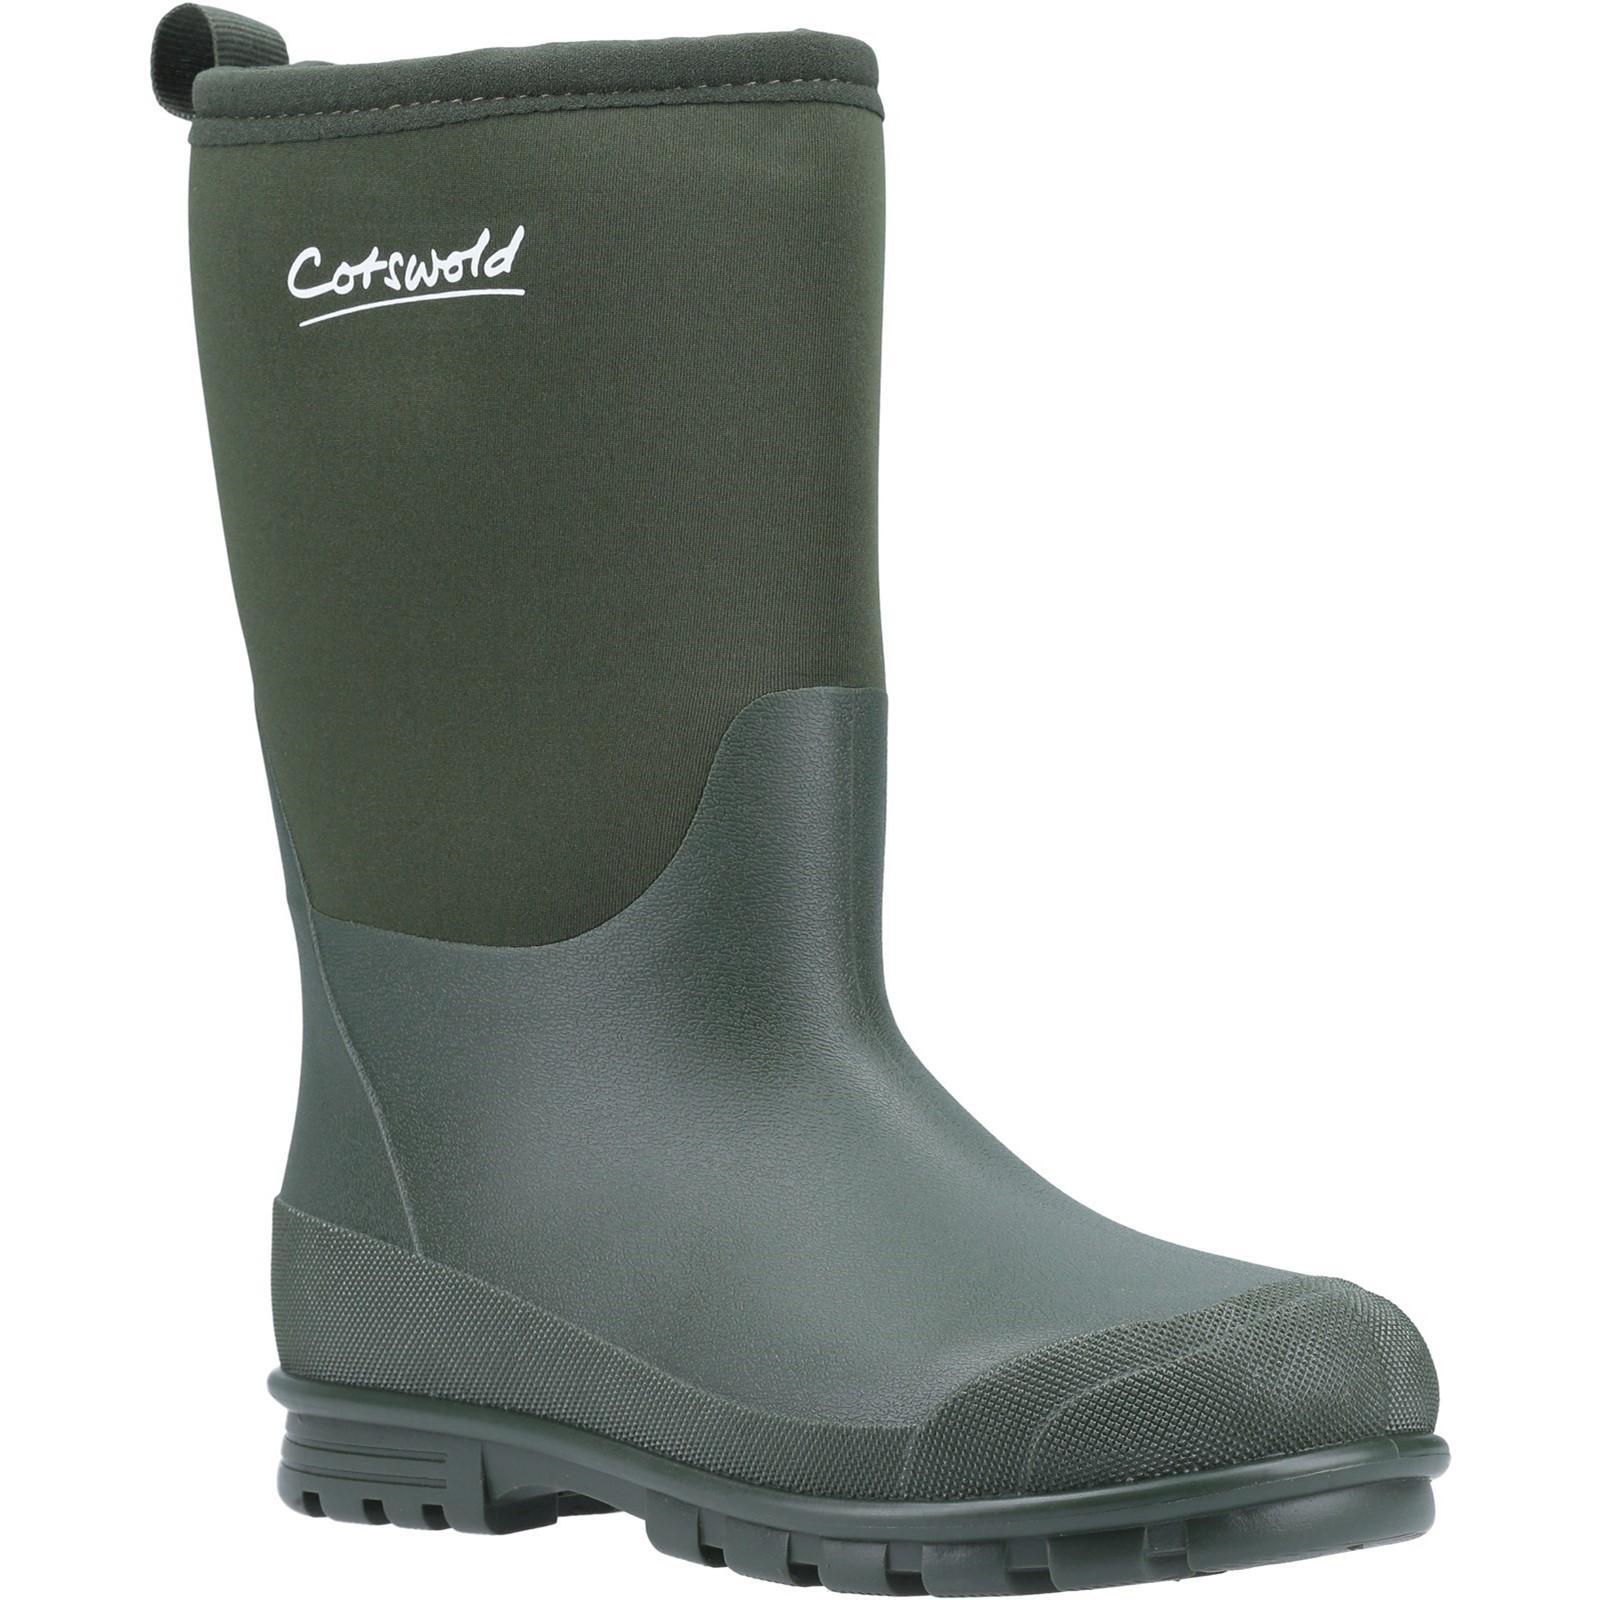 COTSWOLD Childrens/Kids Hilly Neoprene Wellington Boots (Green)